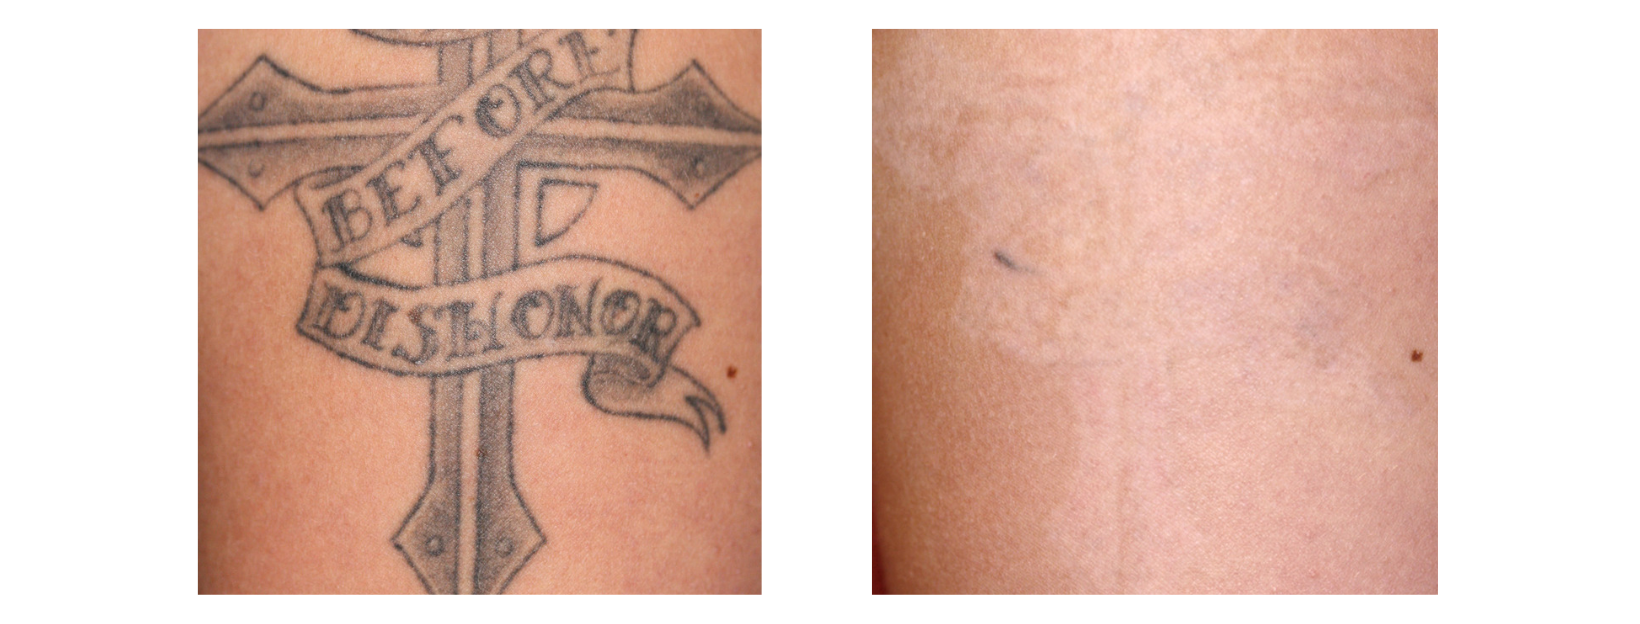 Tattoo Removal Dark Tones and writing